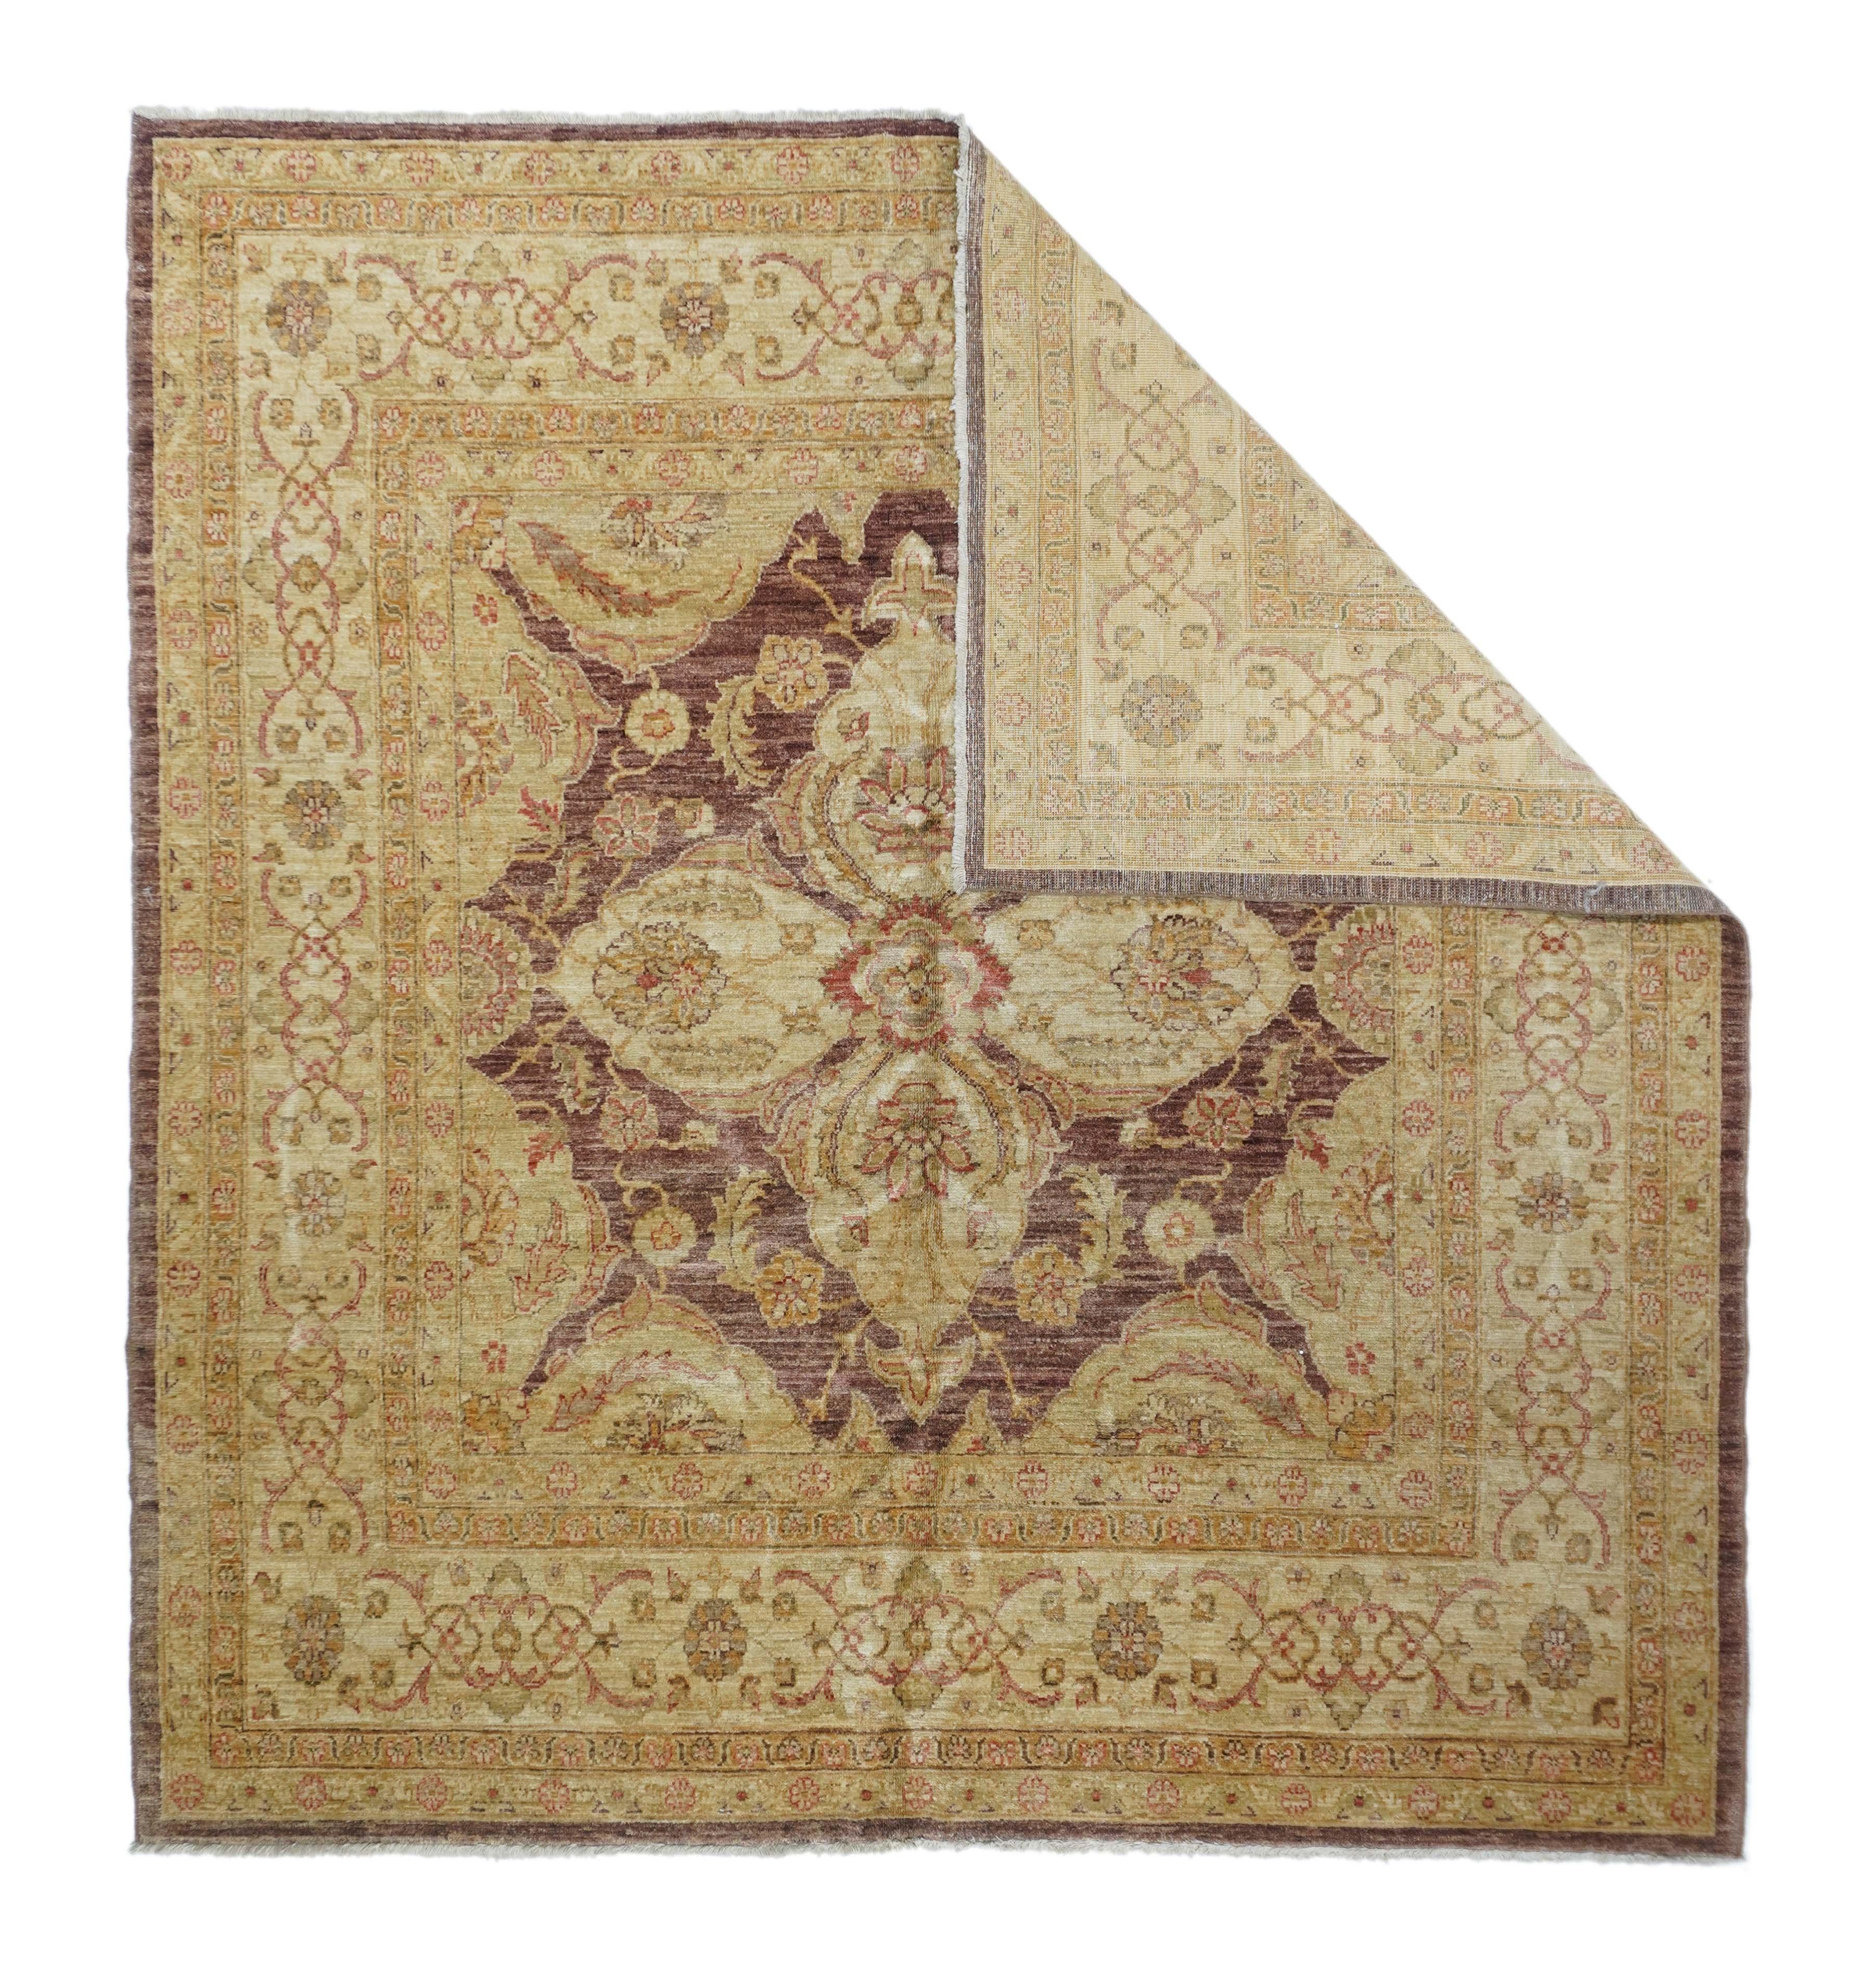 This Pakistan scatter shows a striated abrash red field centred by a large palmette cross, with fractional medallions in the corners. Ecru-beige border with small rosettes and arabesque interlaces. Dark red plain outer frame. Medium weave on cotton.